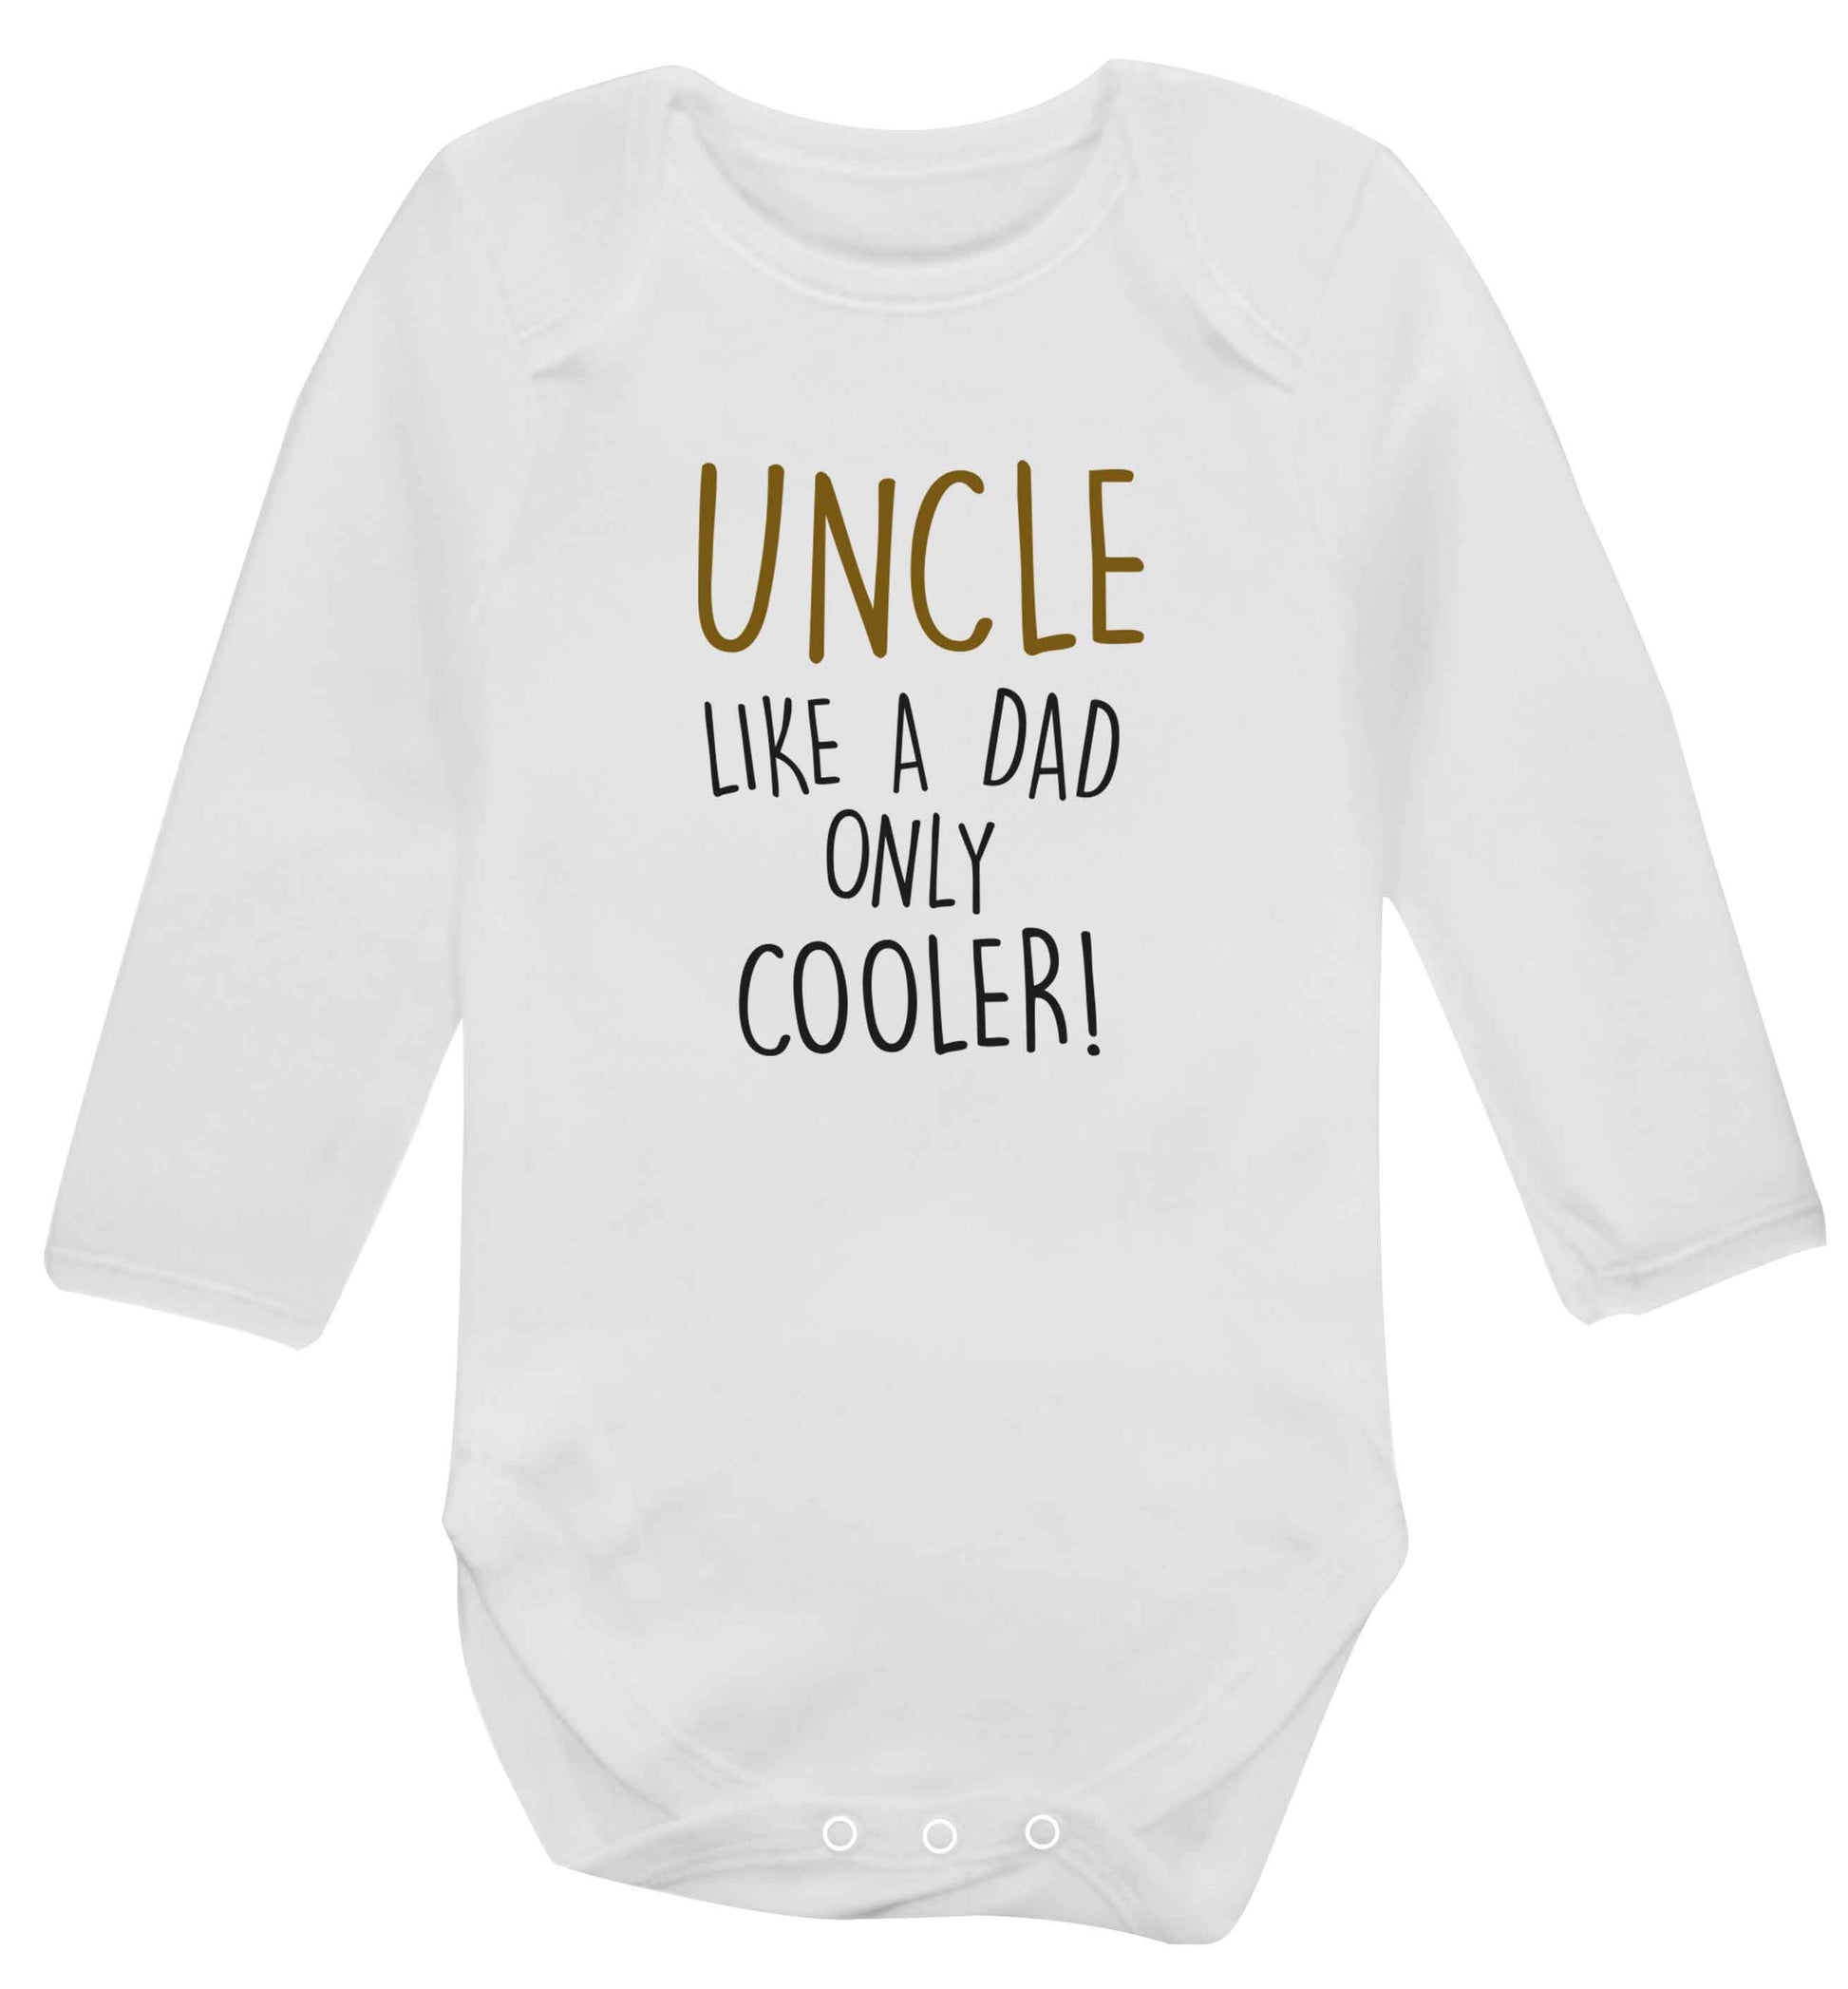 Uncle like a dad only cooler baby vest long sleeved white 6-12 months